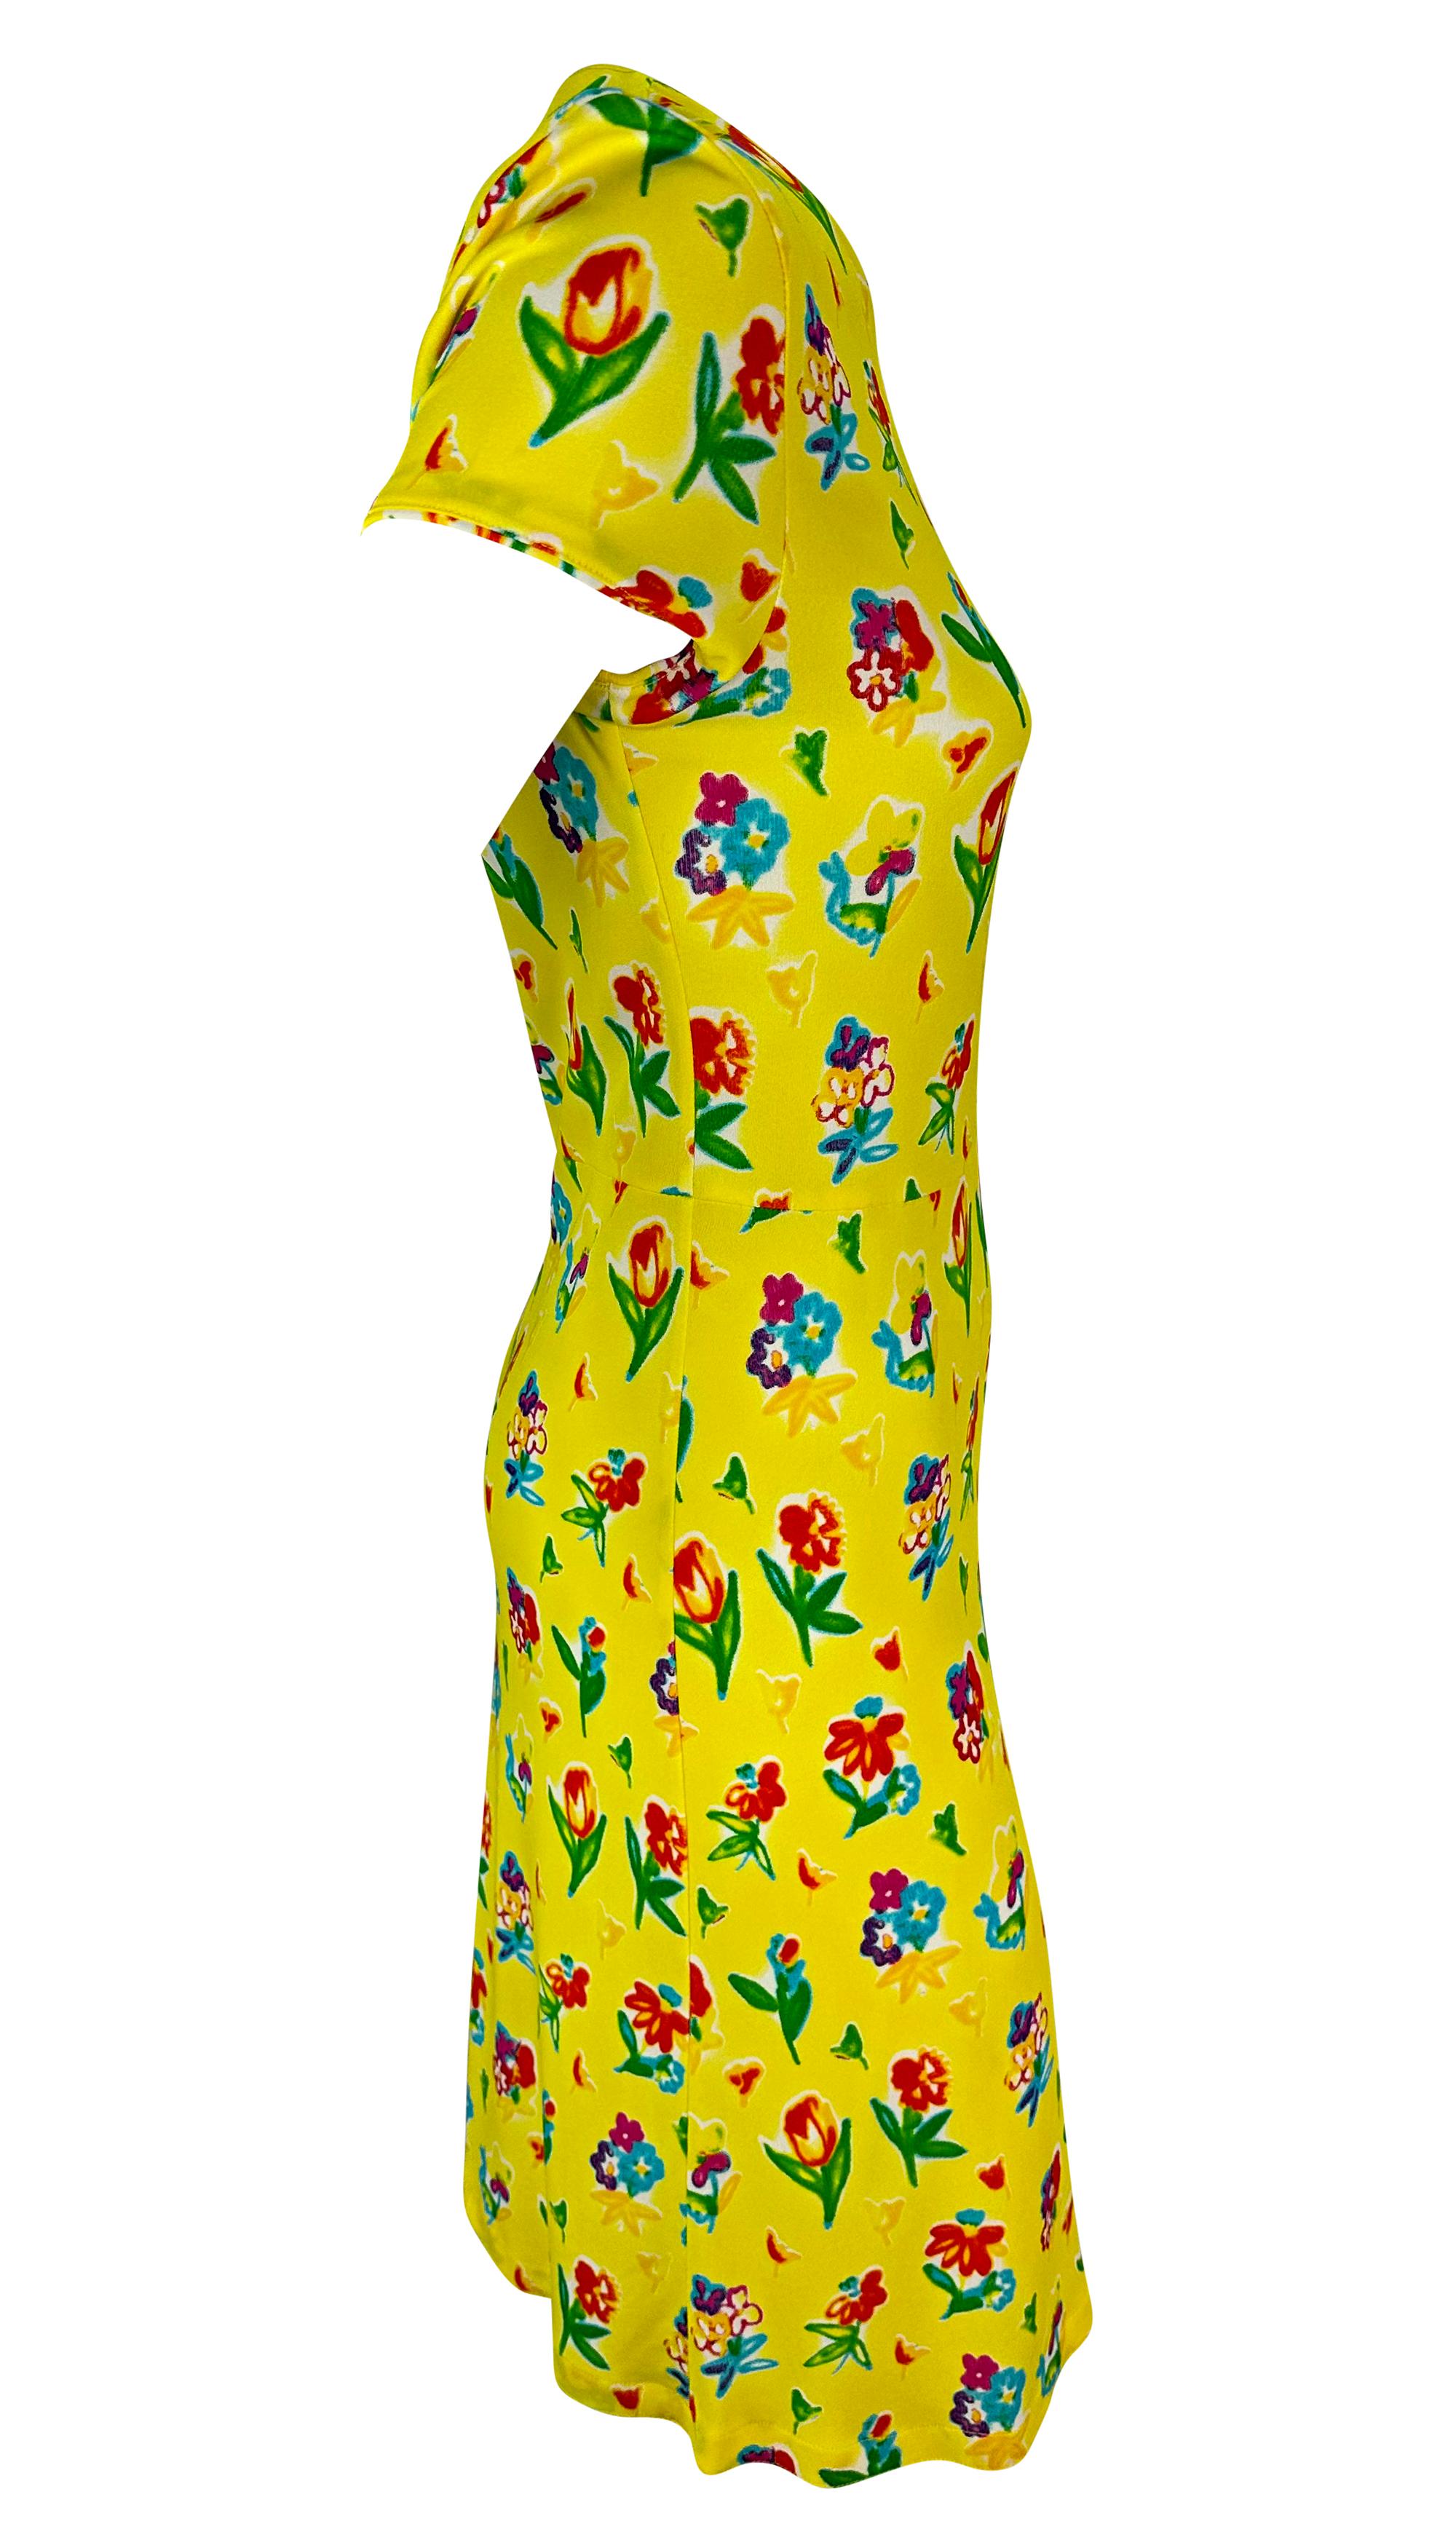 S/S 1996 Gianni Versace Yellow Floral Short Sleeve Viscose Midi Dress For Sale 2